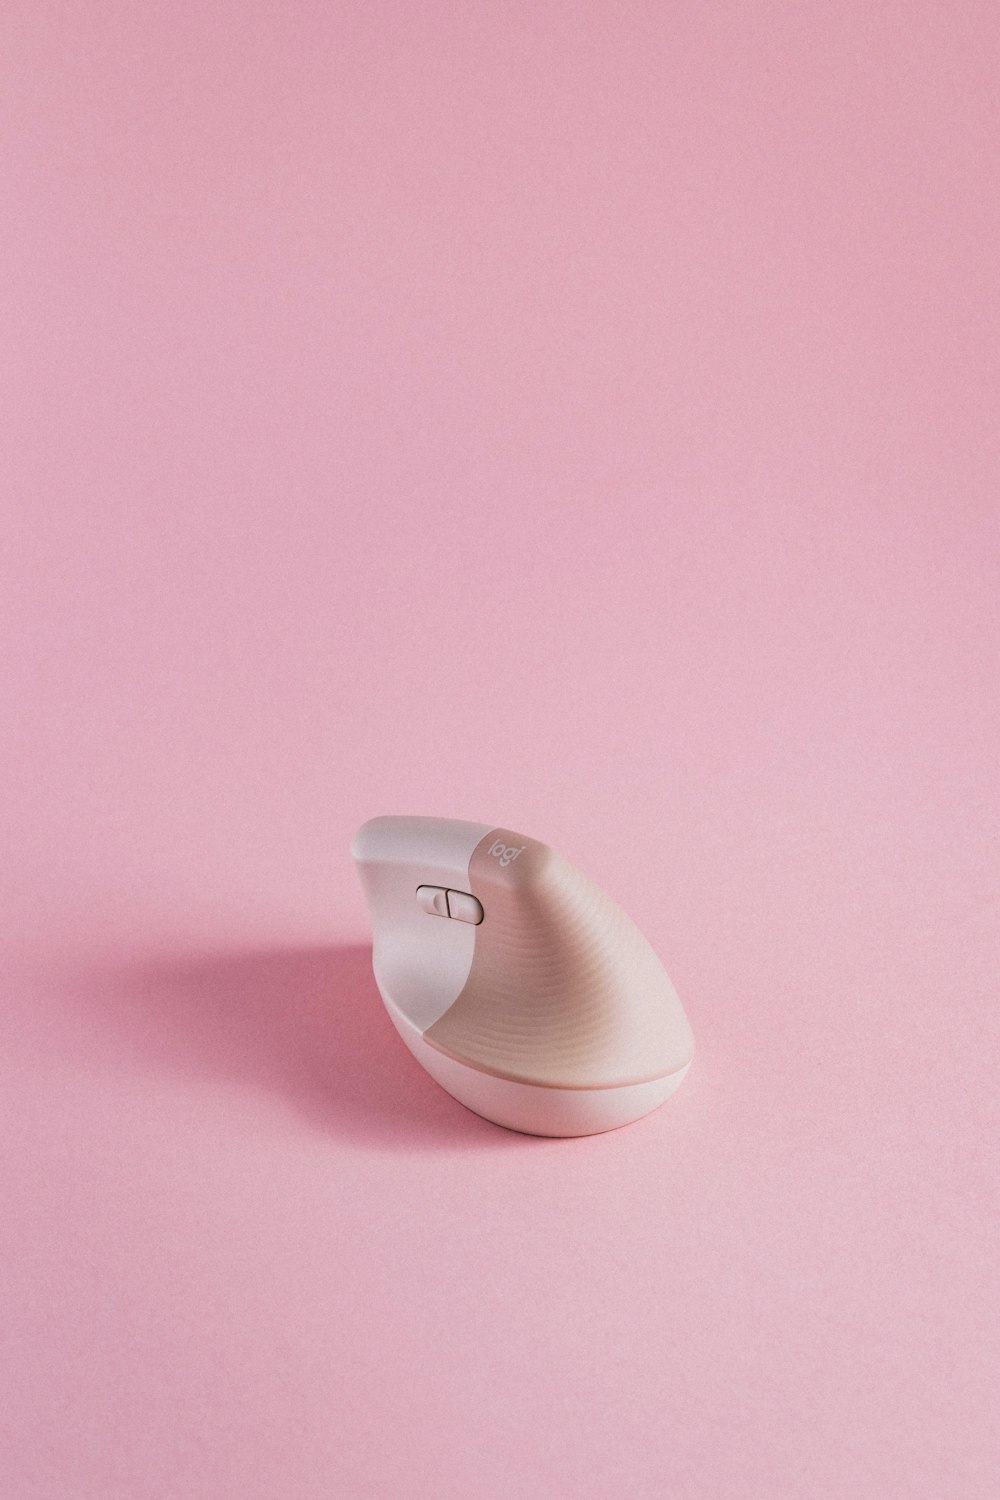 a computer mouse sitting on top of a pink surface